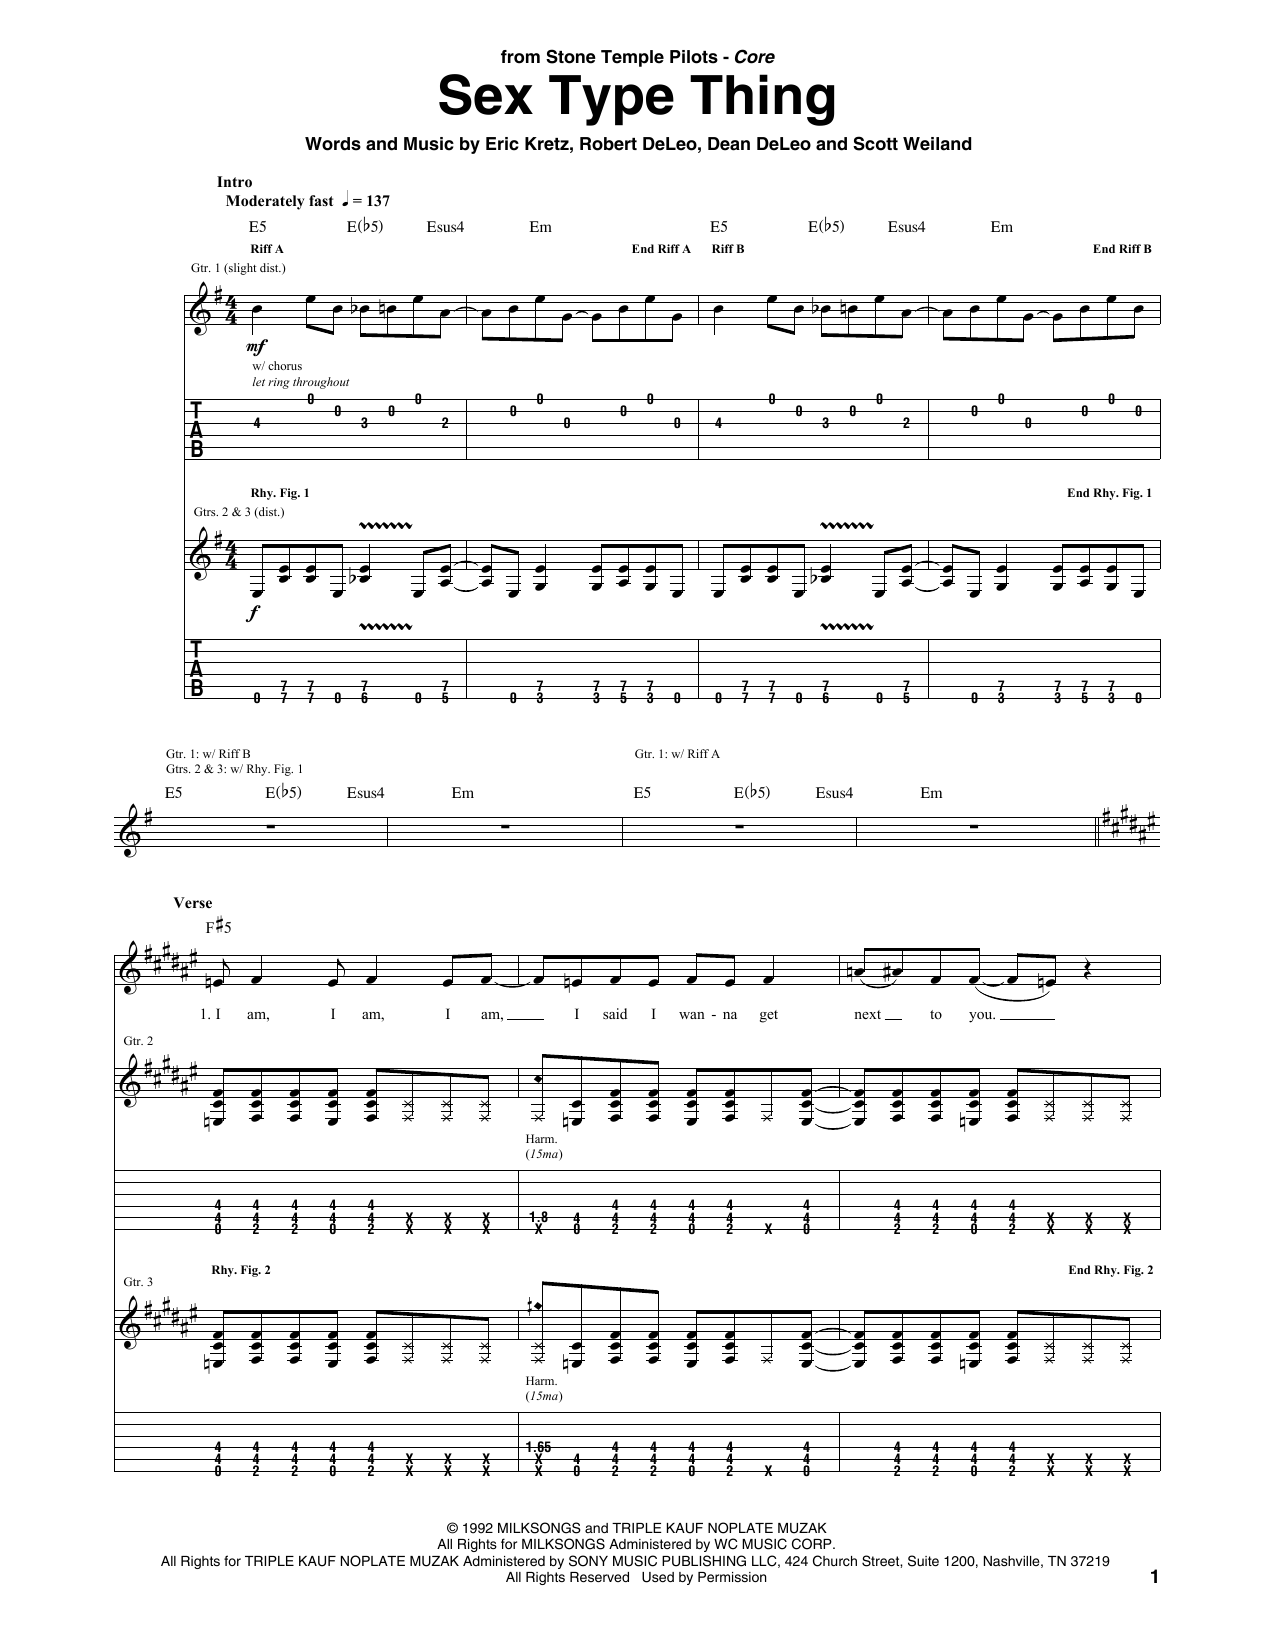 Download Stone Temple Pilots Sex Type Thing Sheet Music